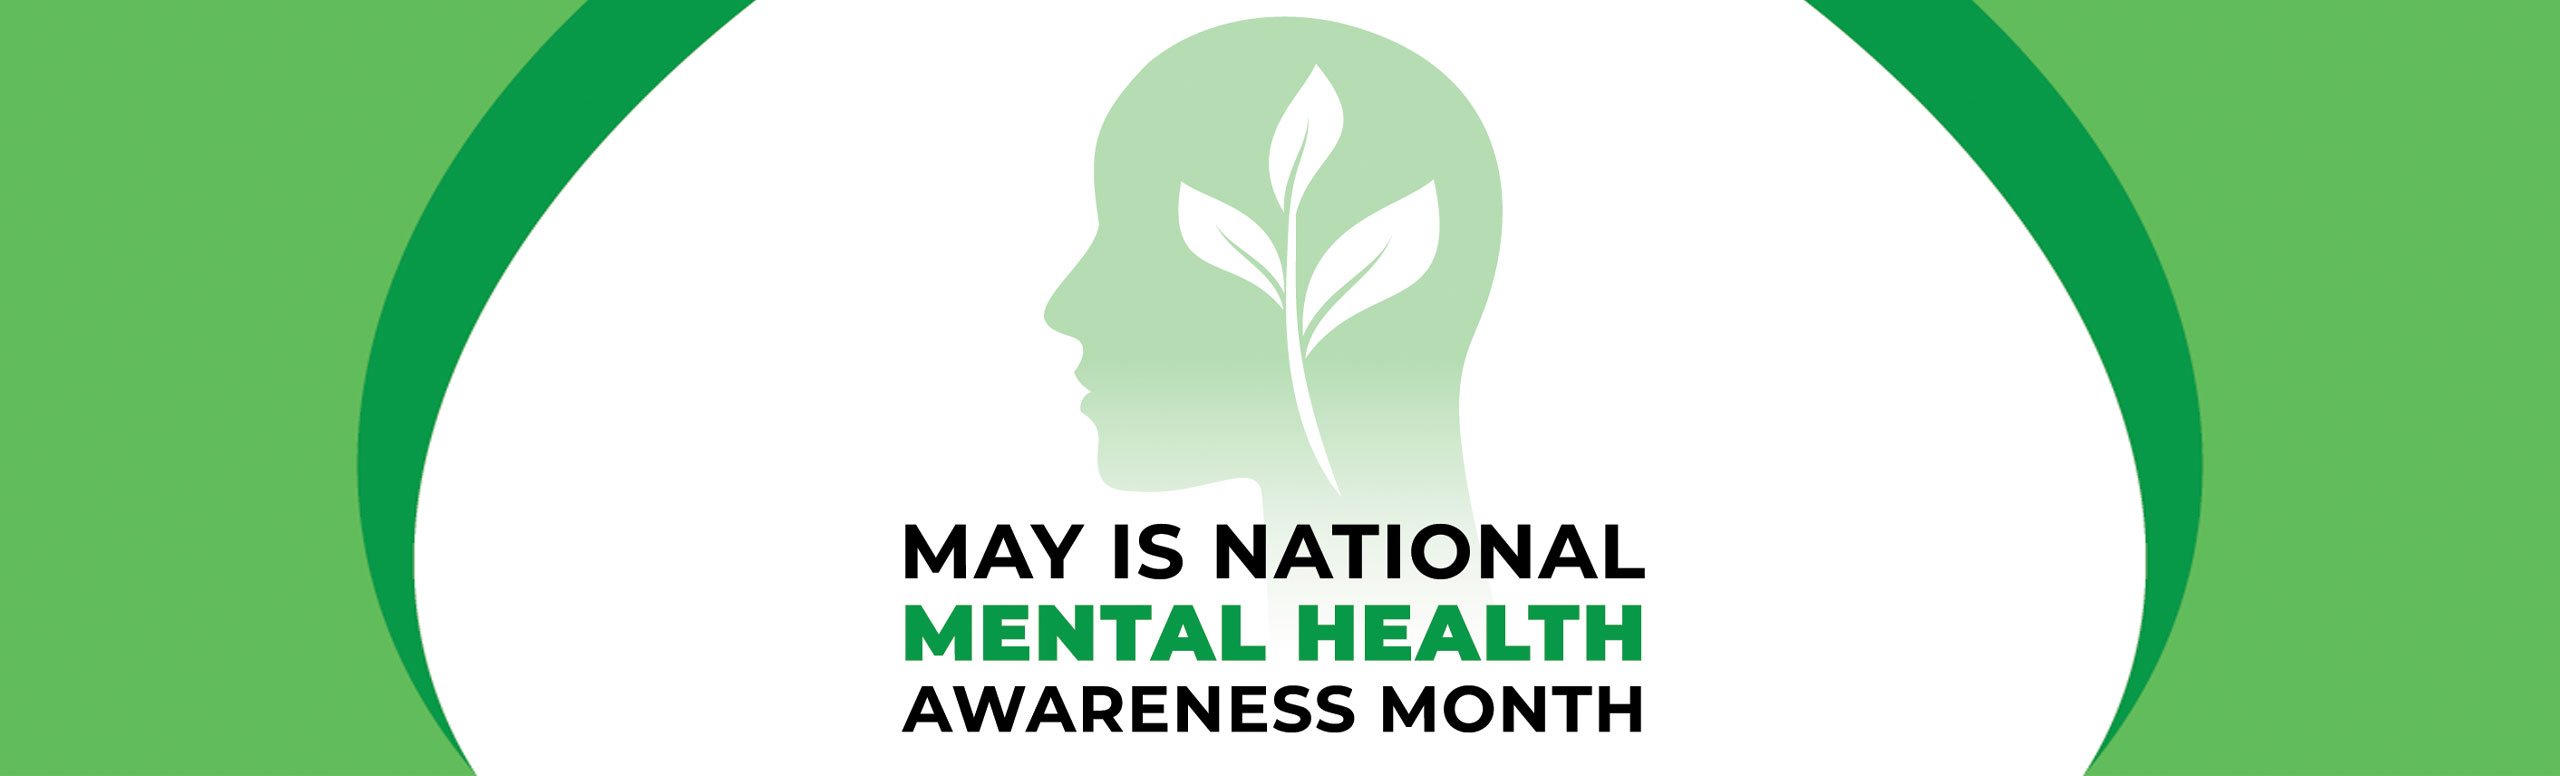 Banner picture of a side view figure of a persons face with a leaf going up the side of the face. Banner says:
May is National Mental Health Awareness Month